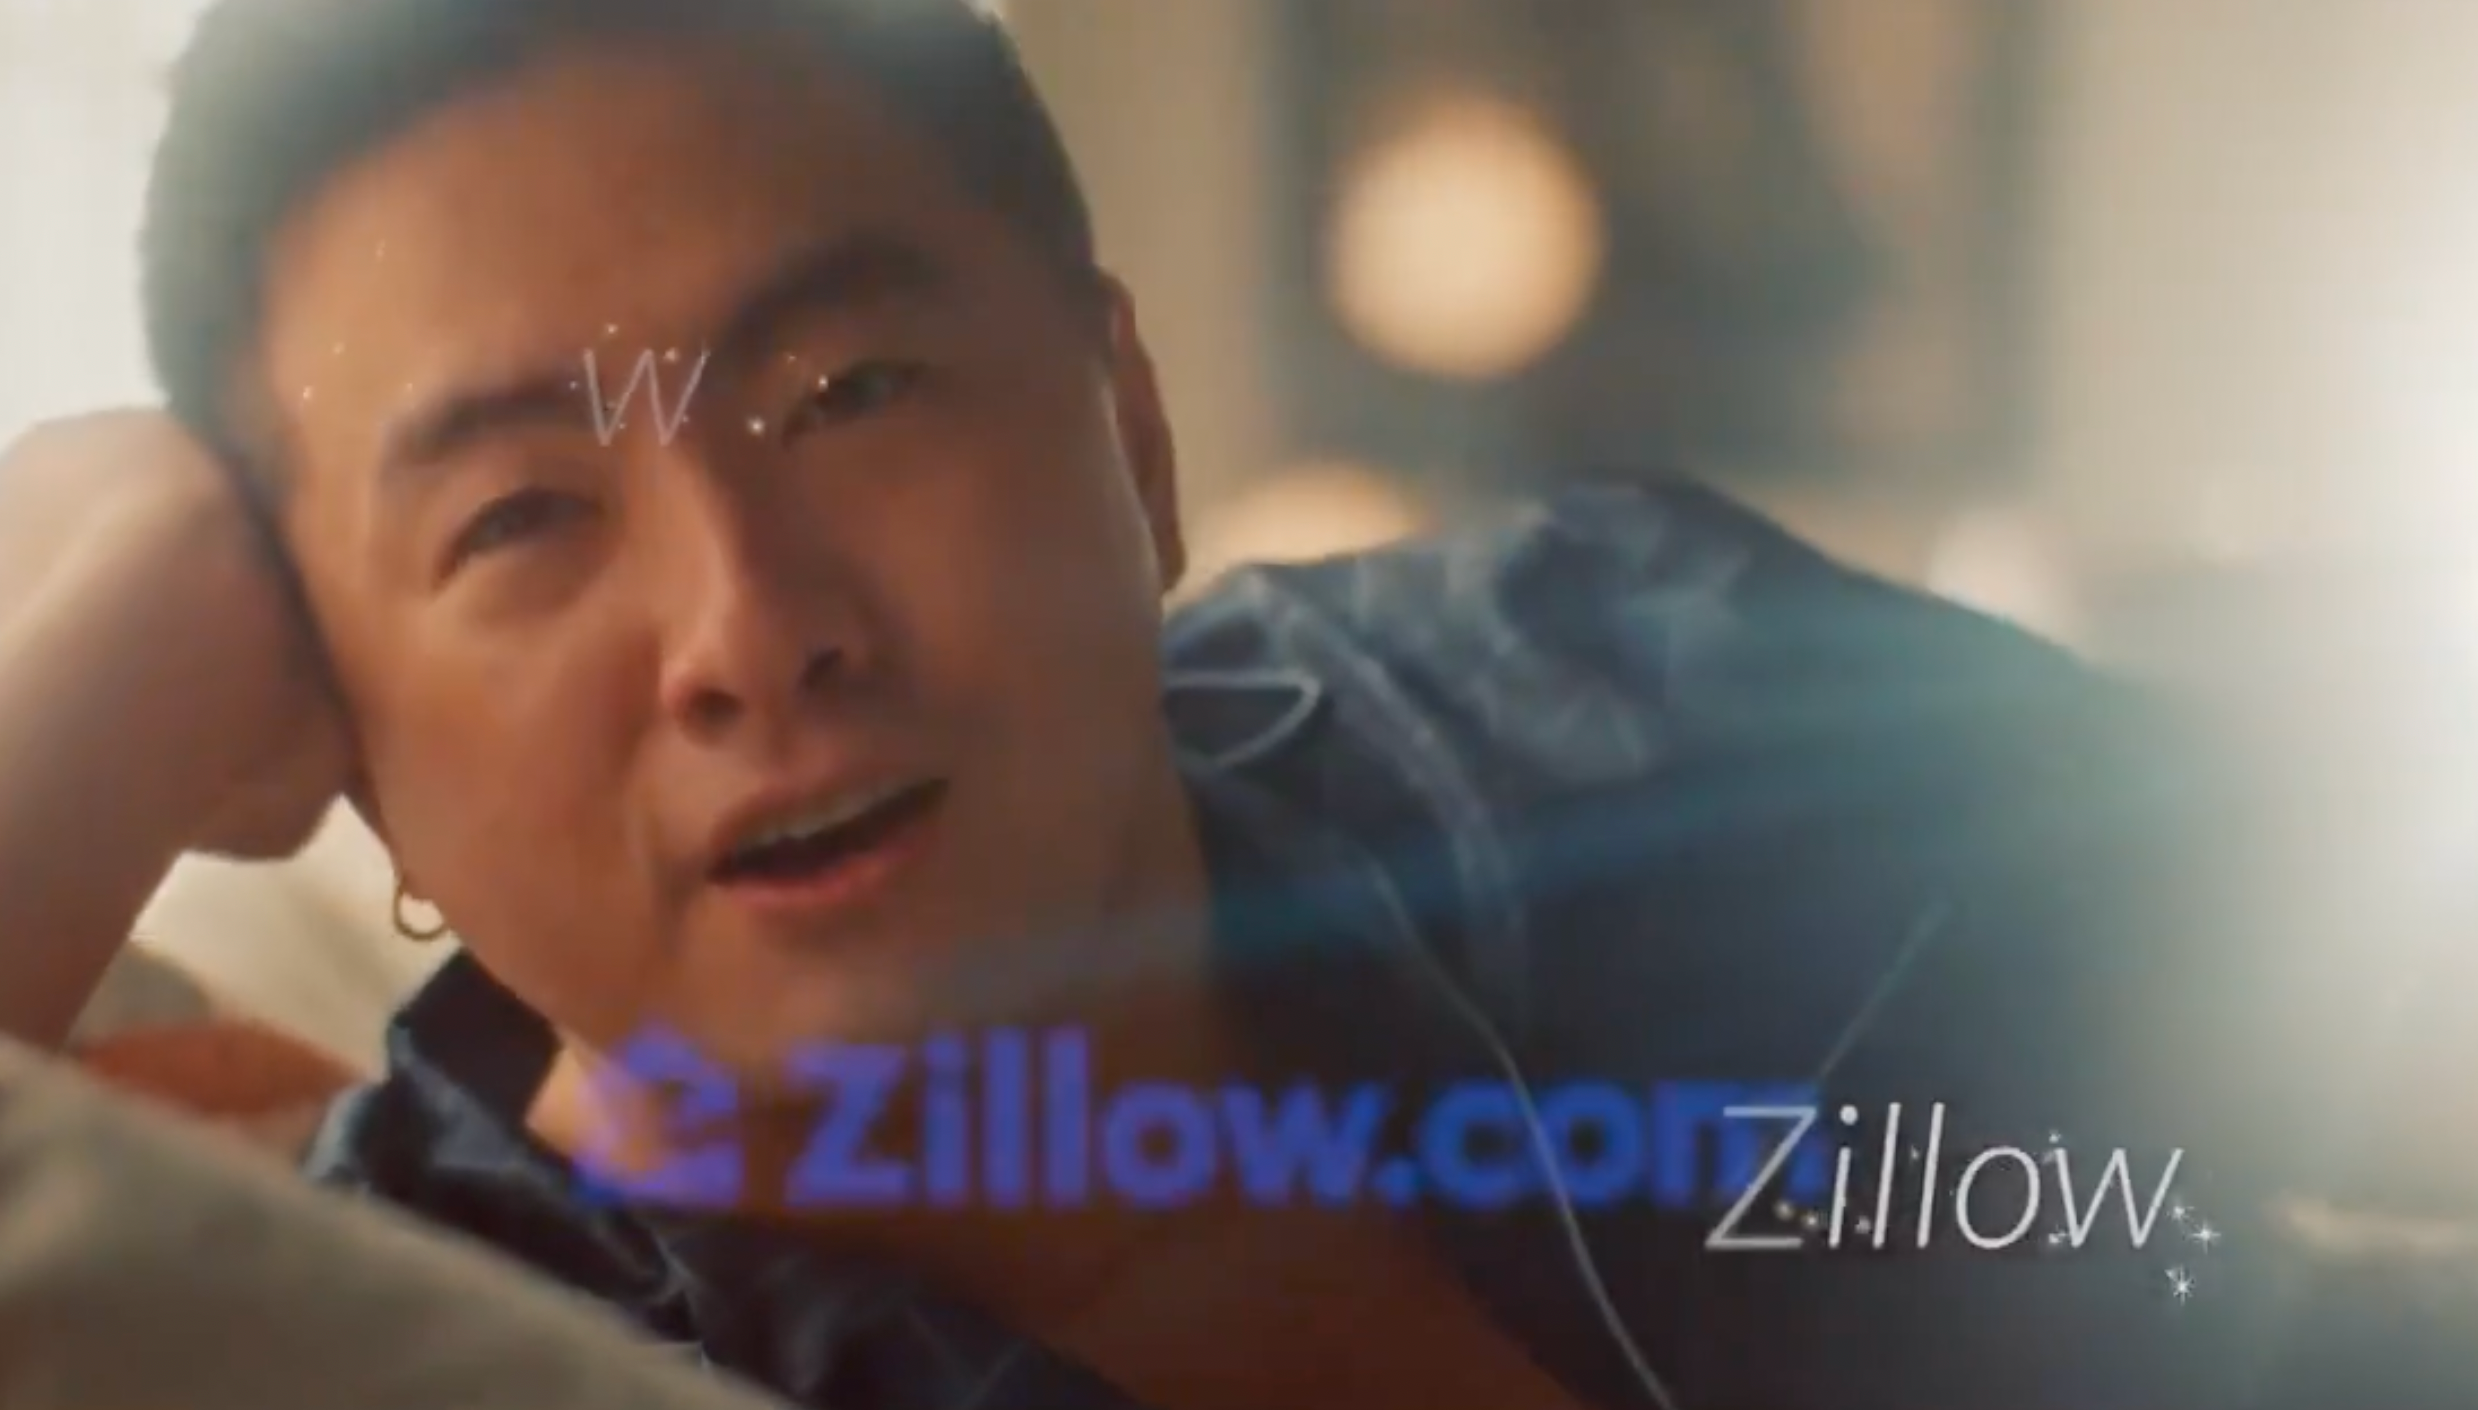 SNL compares surfing Zillow listings to phone sex in commercial parody